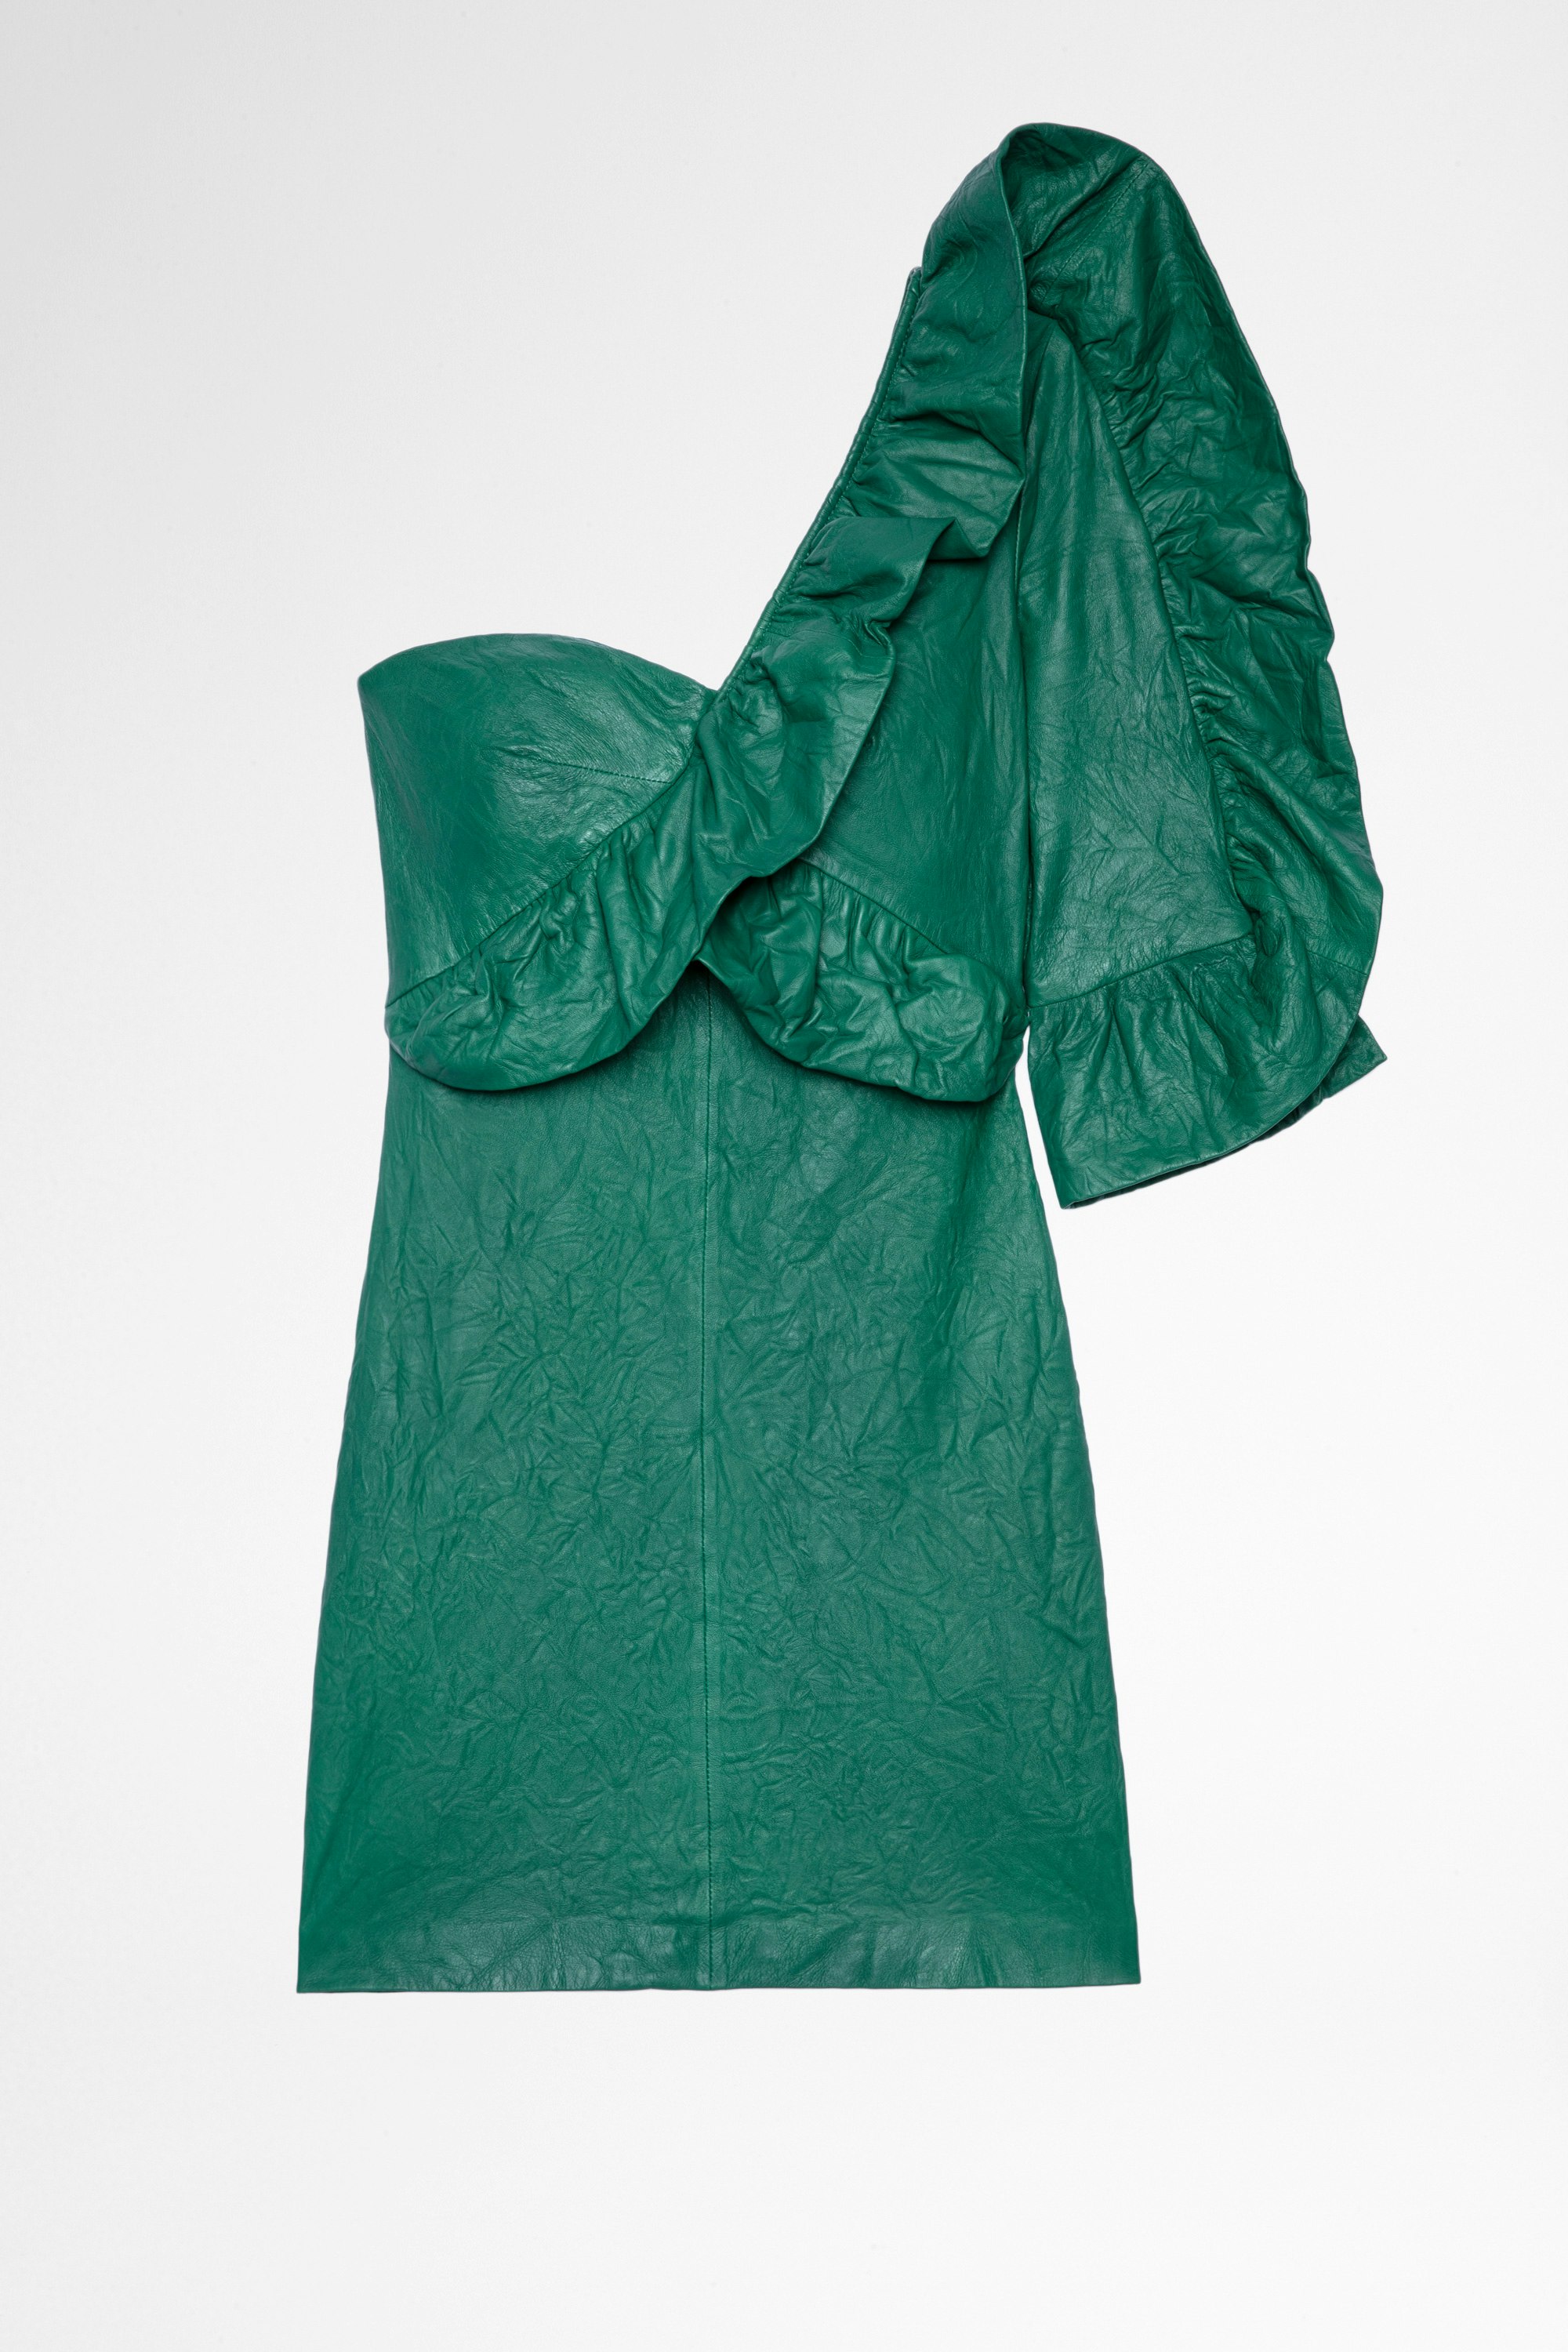 Rainbow ドレス Crinkled レザー Women's asymmetrical green dress in crinkled leather with ruffles